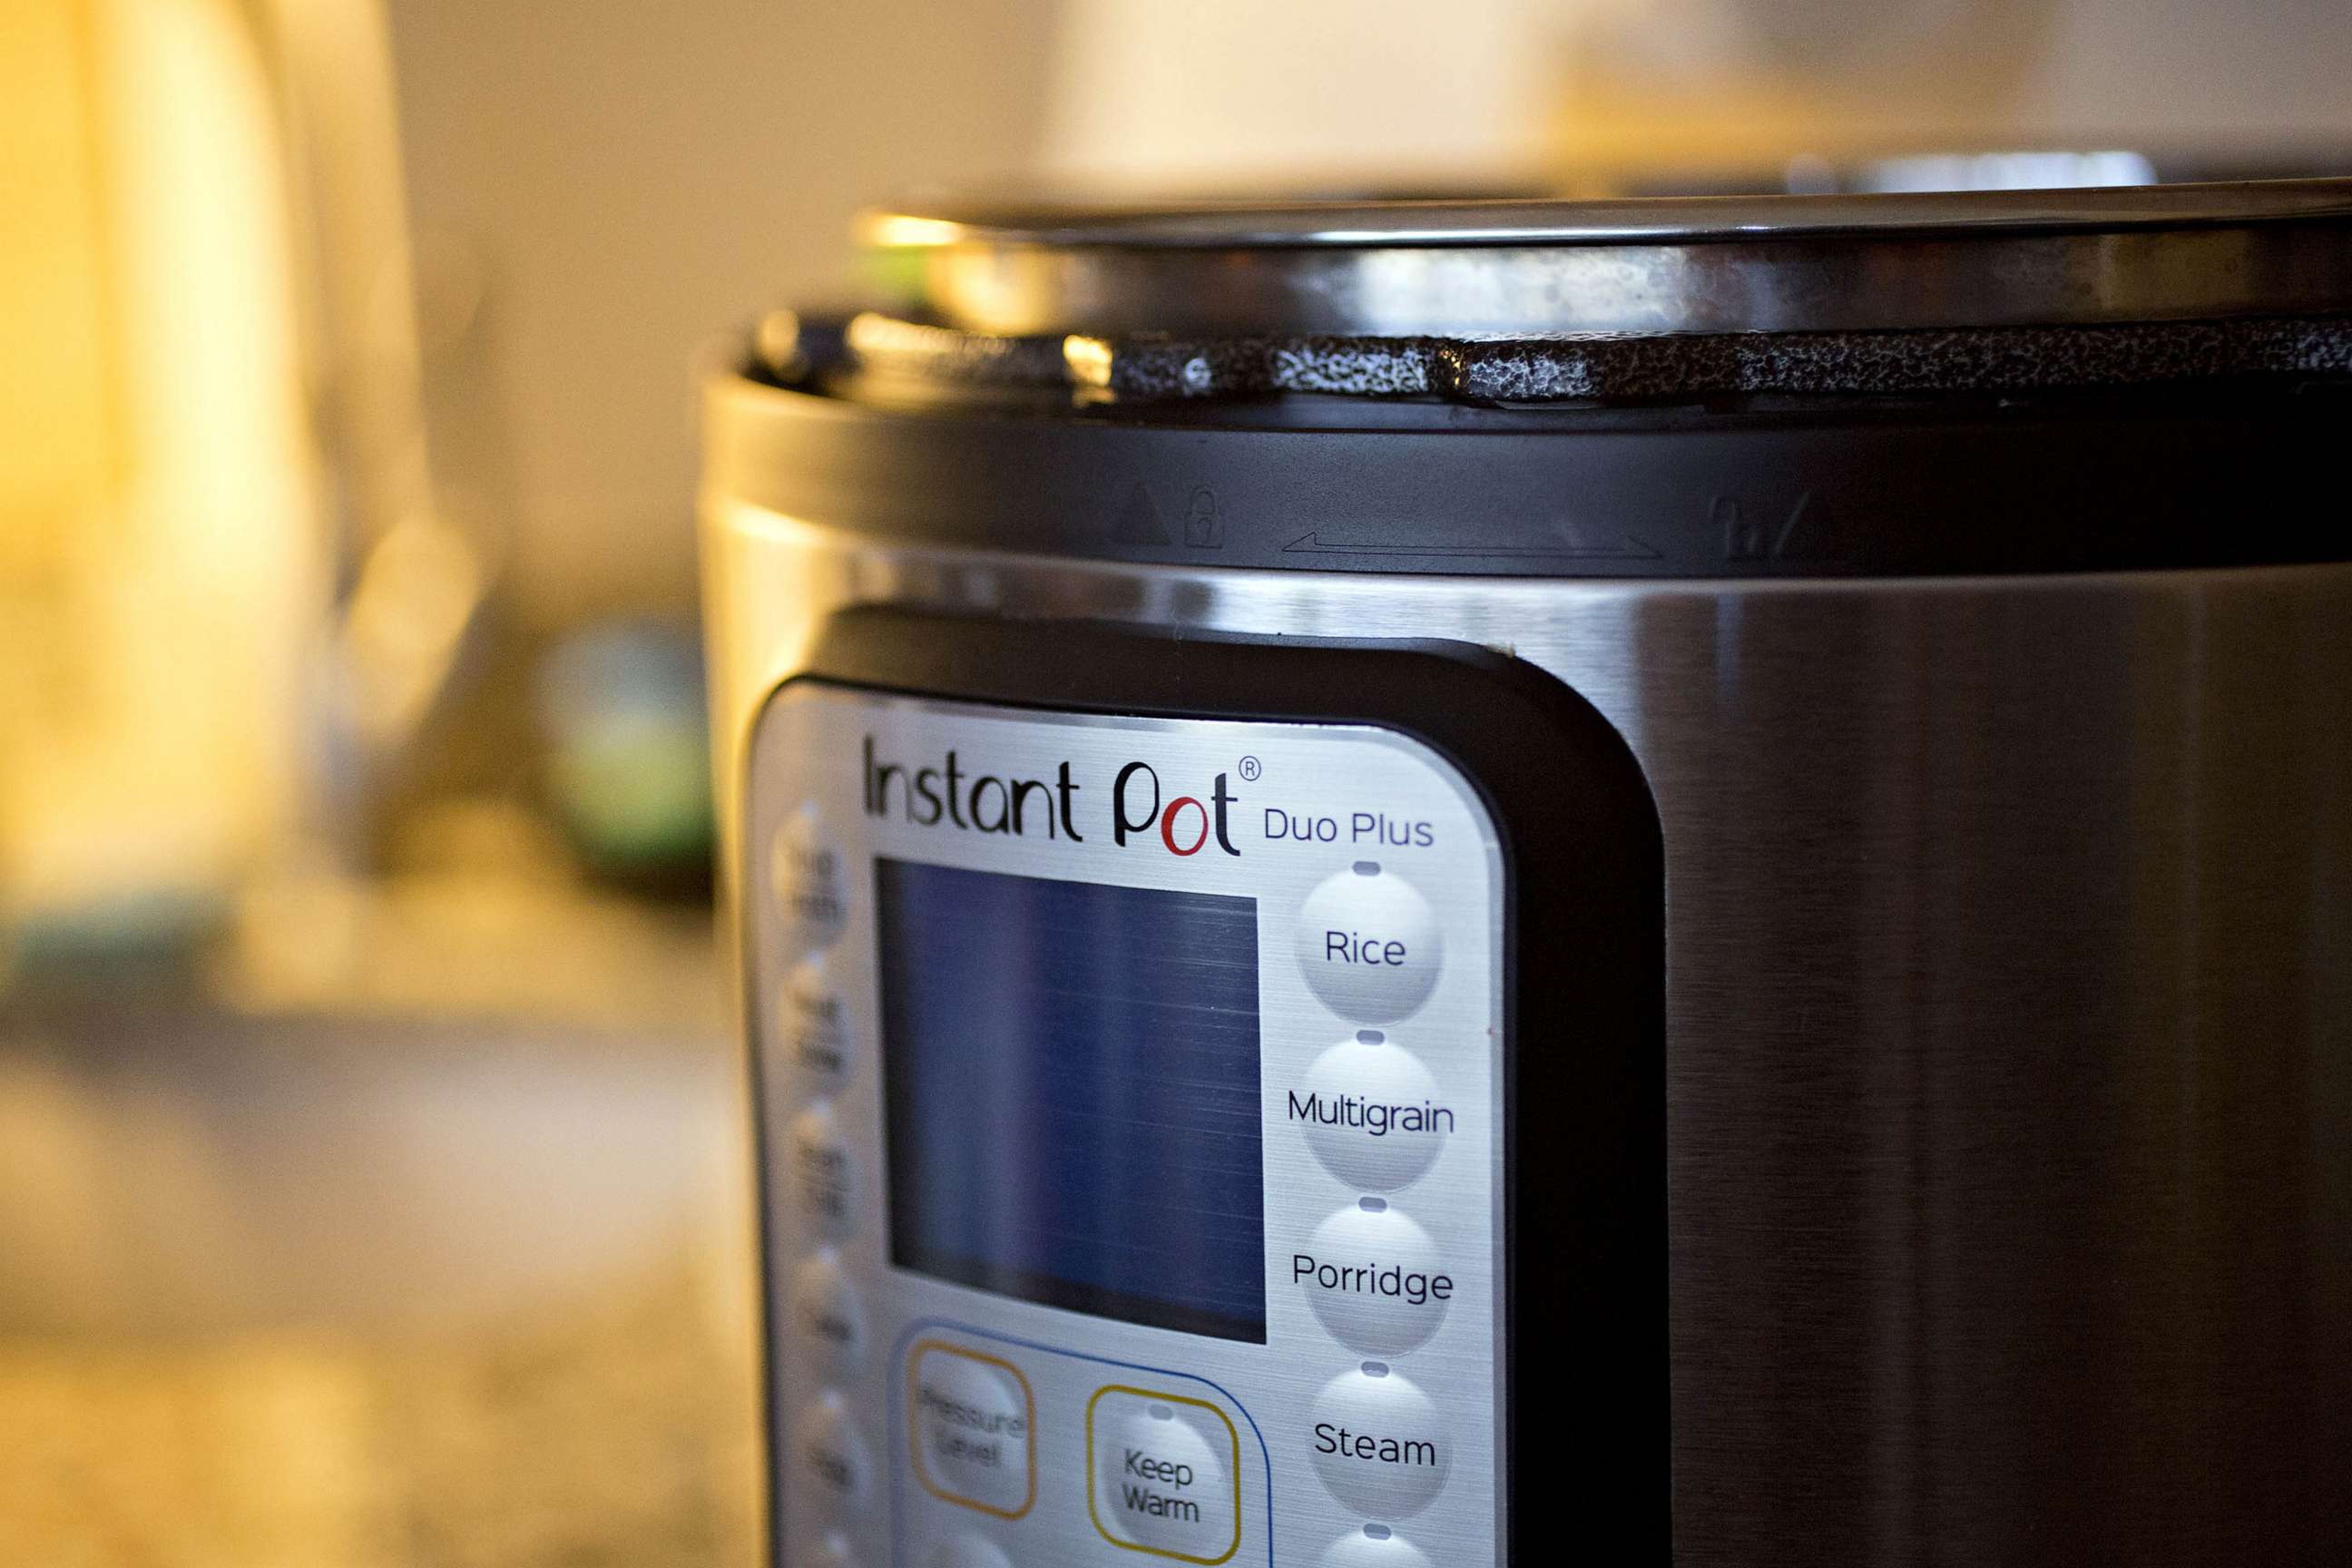 Snapware containers caught in an Instant Pot fiscal shortfall